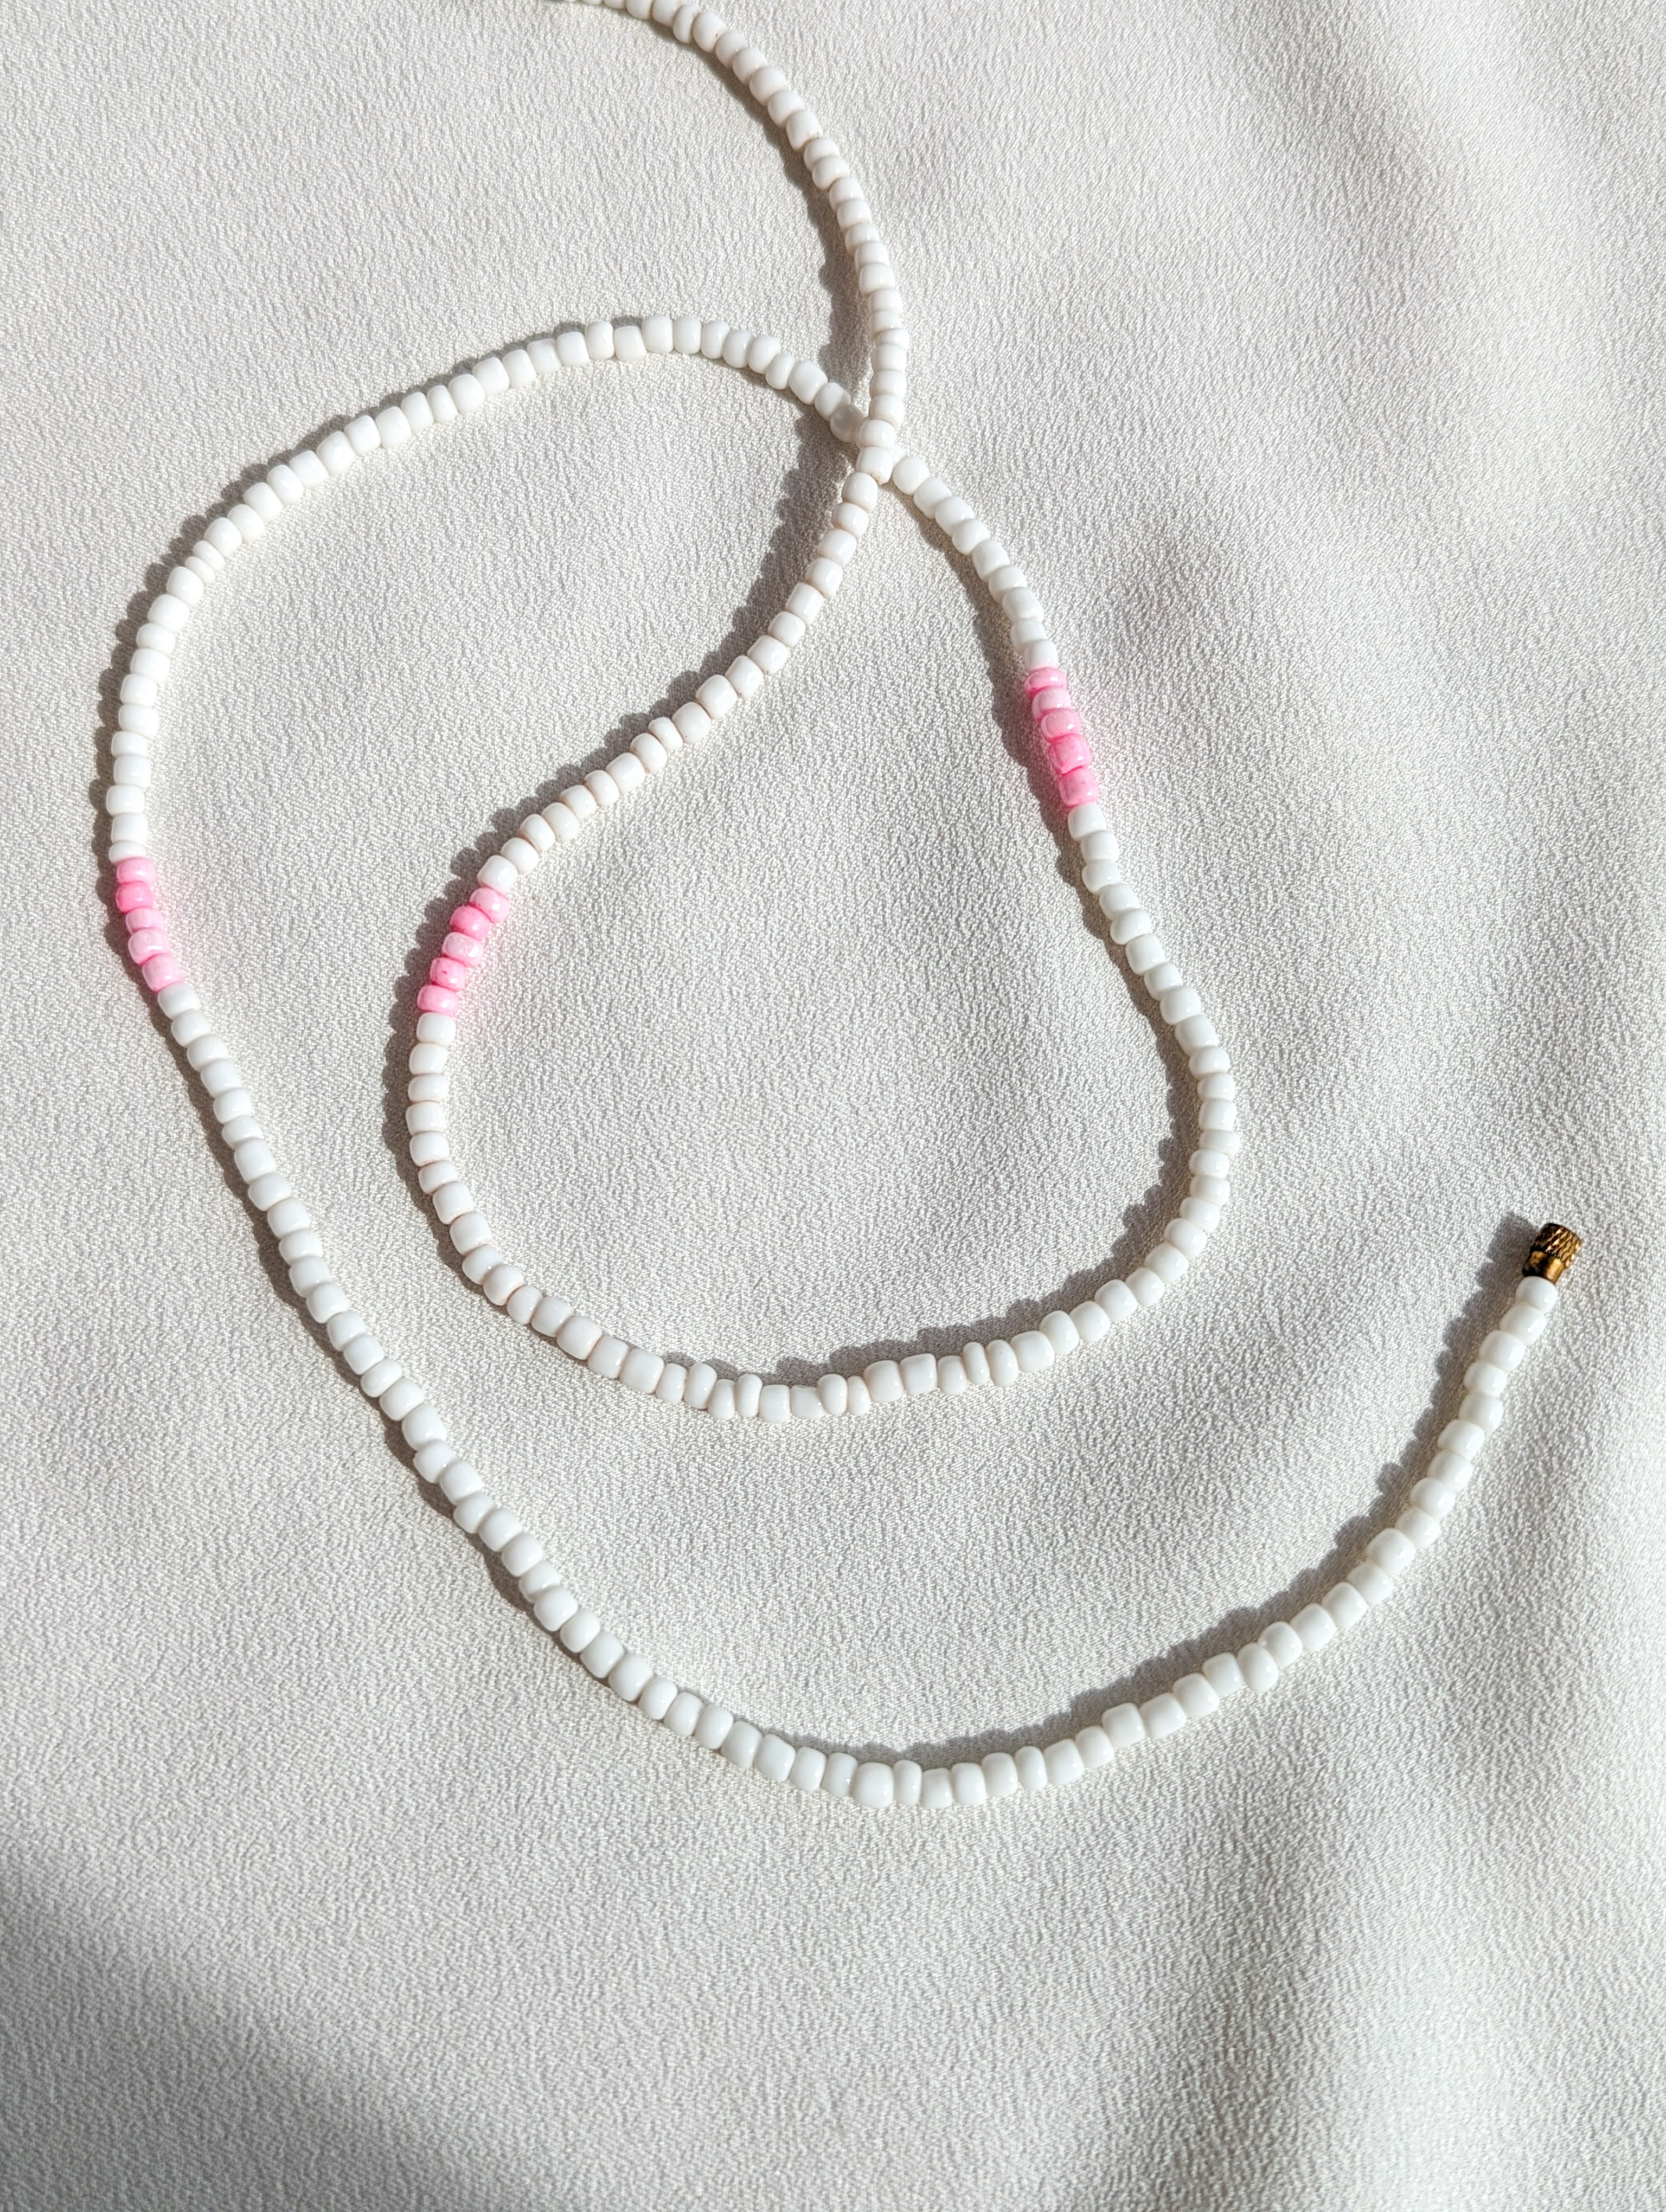 [THE FIFTY FIVE] Belly Chain: White/Pink [Large Beads]